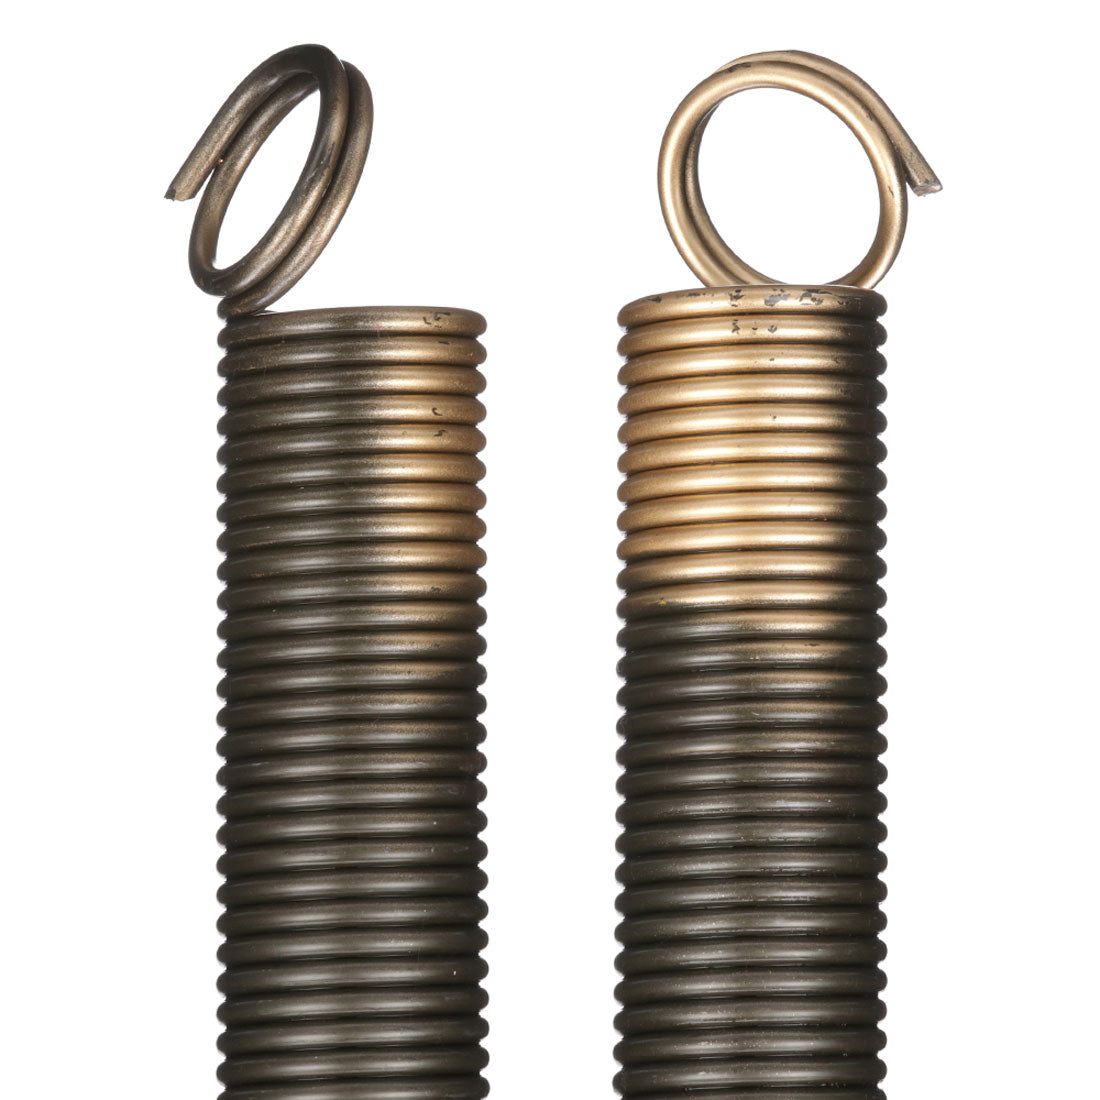 DURA-LIFT 180 lb Heavy-Duty Doubled-Looped Garage Door Extension Spring (2-Pack)